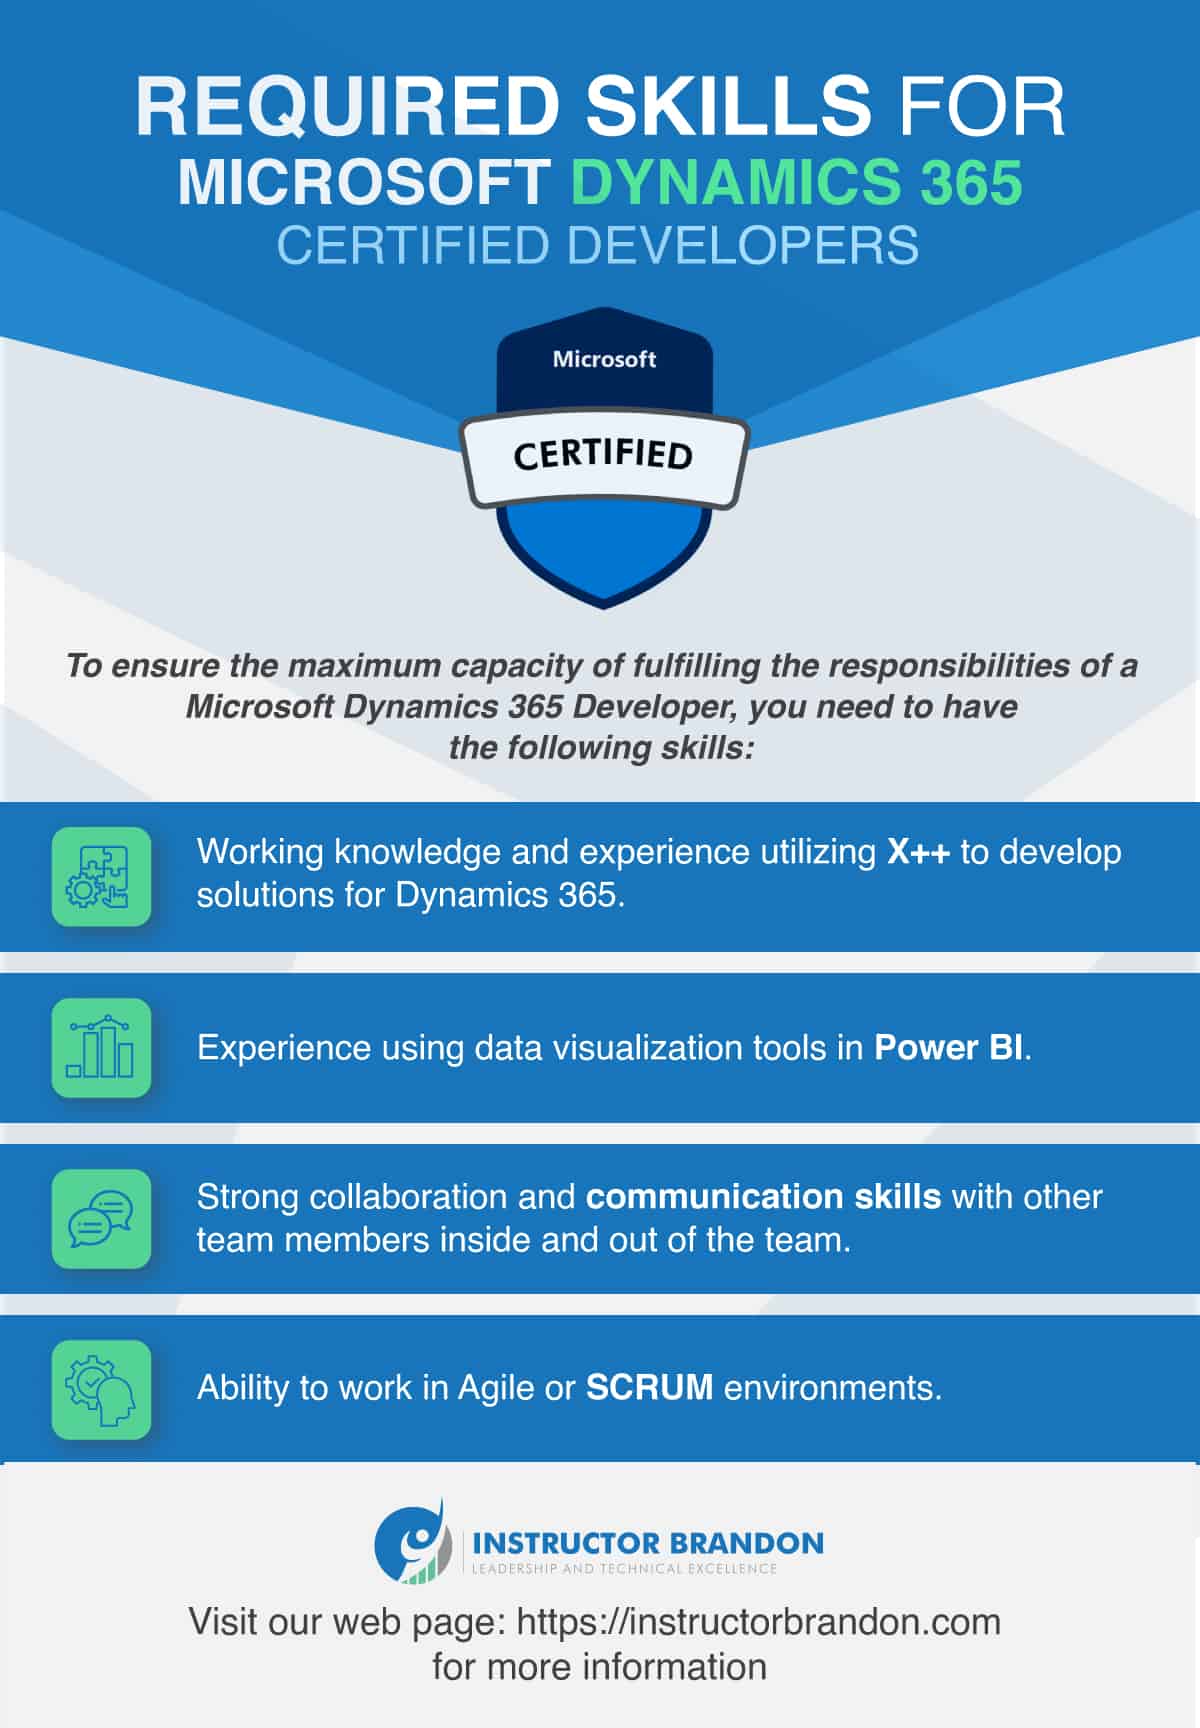 Required Skills for Microsoft Dynamics 365 Certified Developers